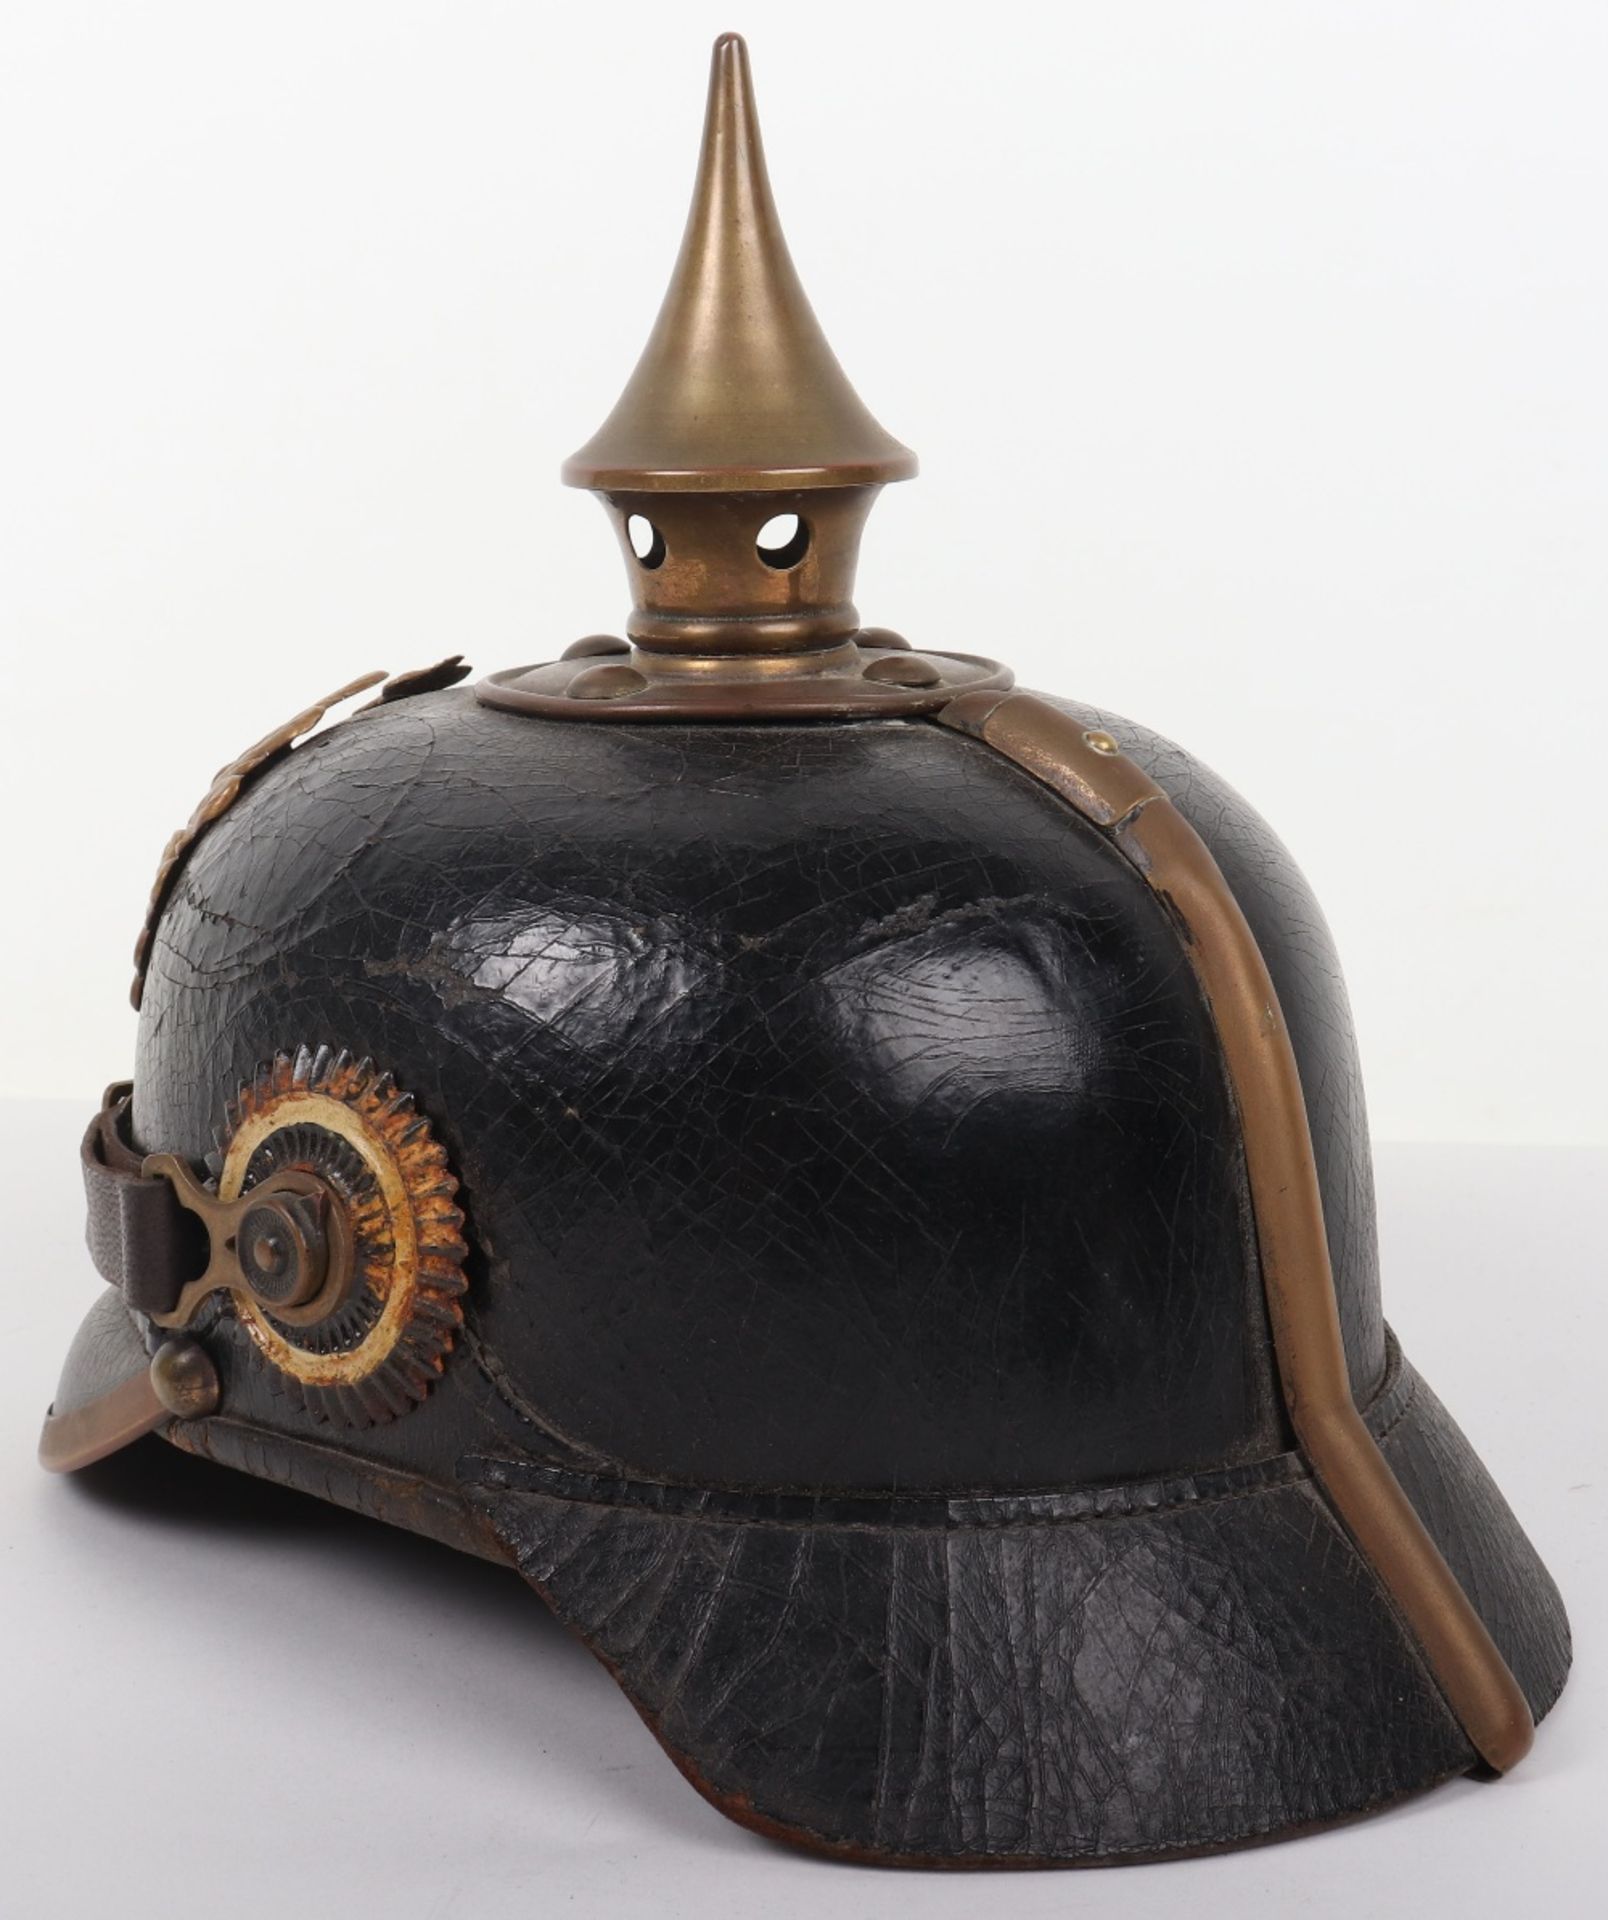 German Infantry Regiment Nr 95 (6.Thuringisches) Other Ranks Pickelhaube with Field Cover - Image 10 of 32